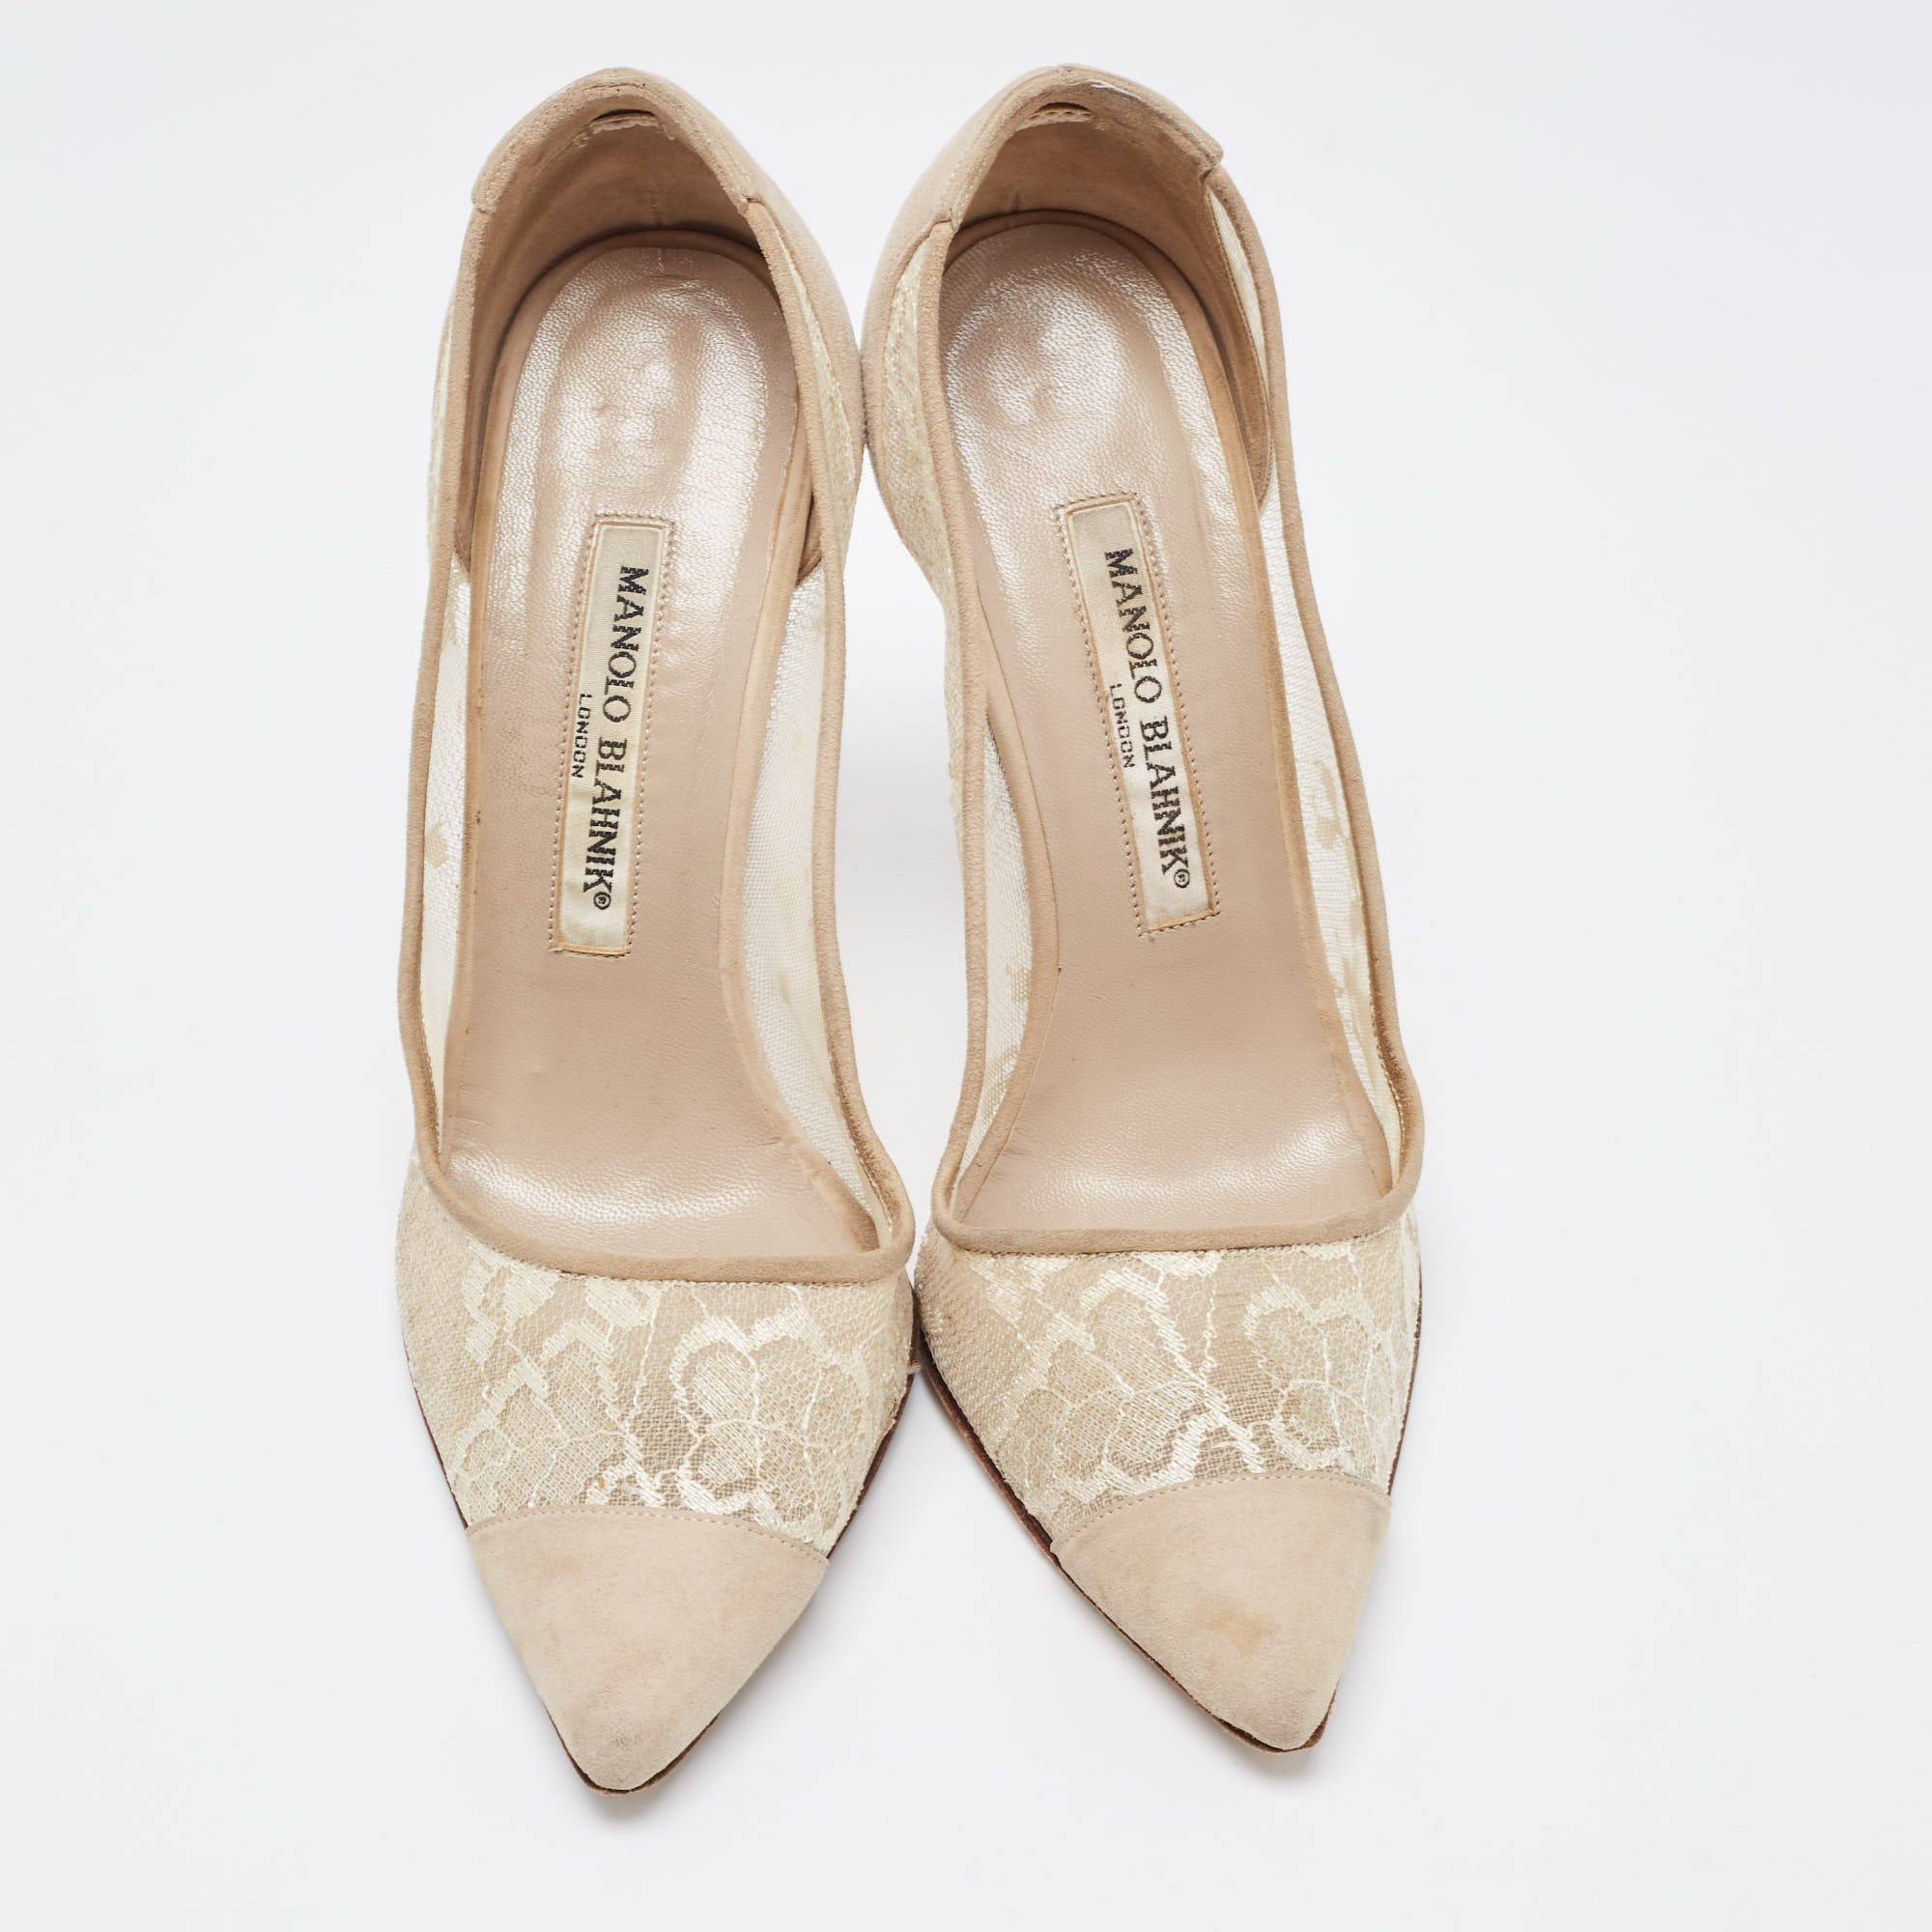 Manolo Blahnik Cream Suede And Mesh Pointed Toe Pumps Size 37